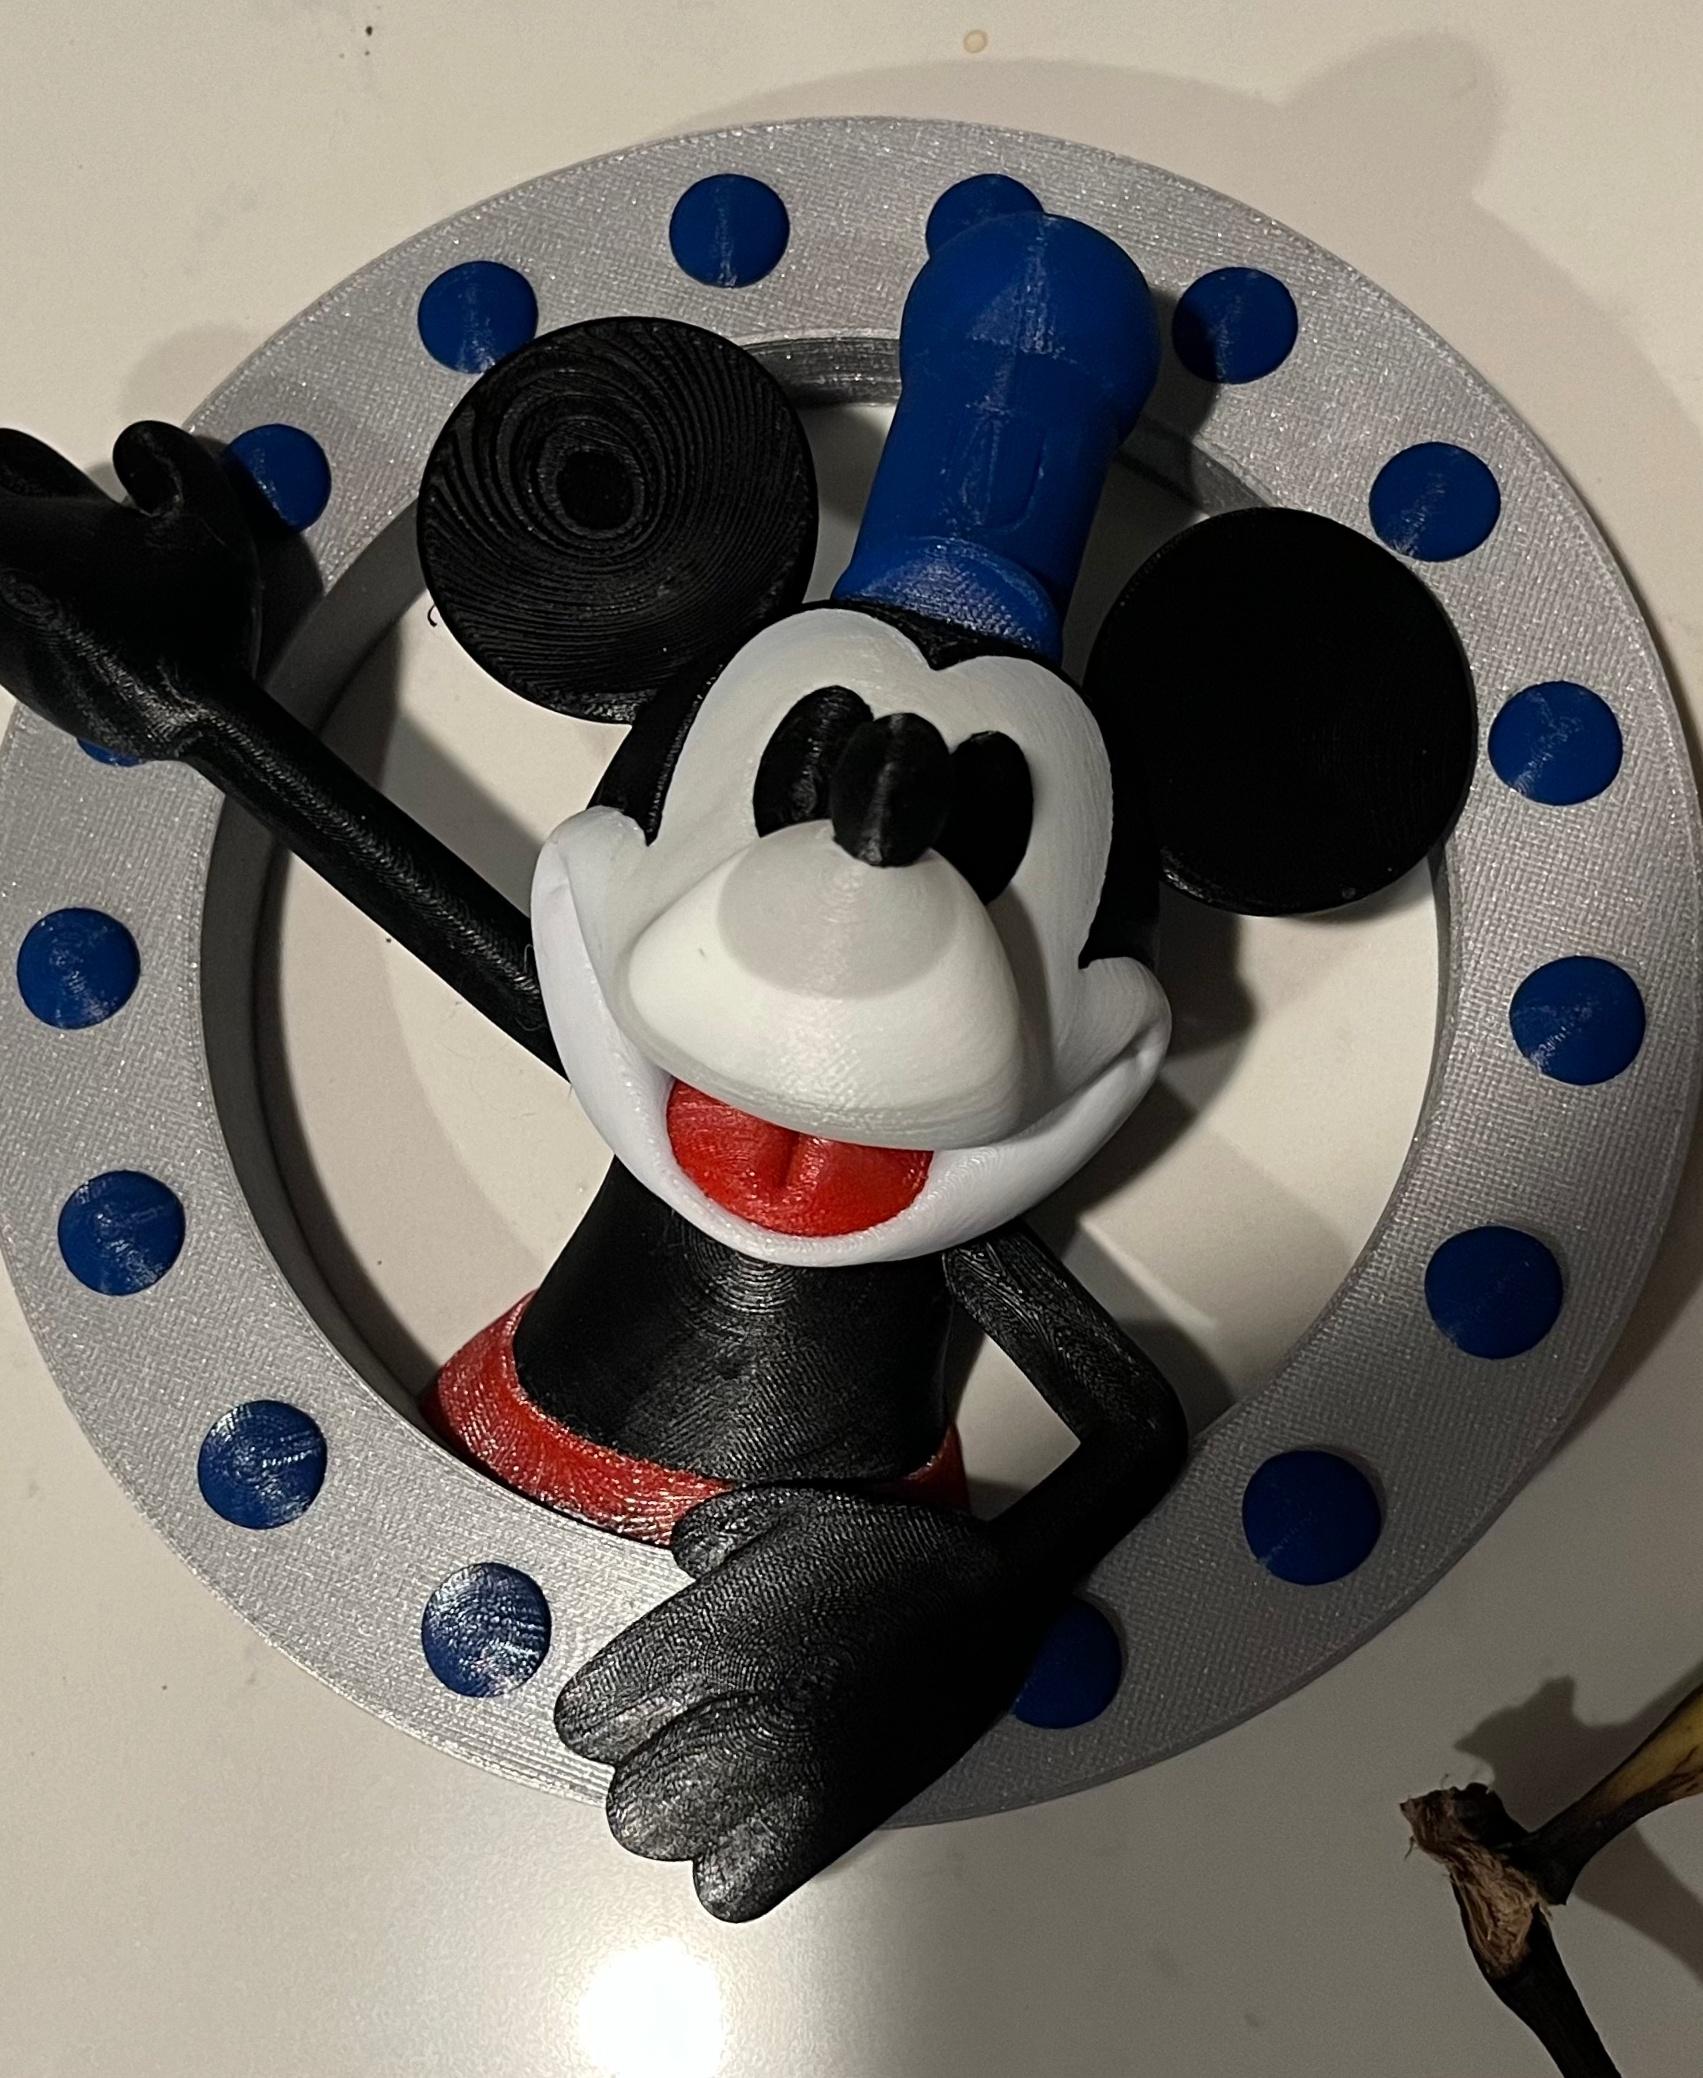 Steamboat Willie Porthole -Wall Art - Painted in PrusaSlicer, Printed on Prusa i3 MK3S+ with MMU3.

Next time: need to fix color bleeding with the white filament on the nose/mouth. - 3d model